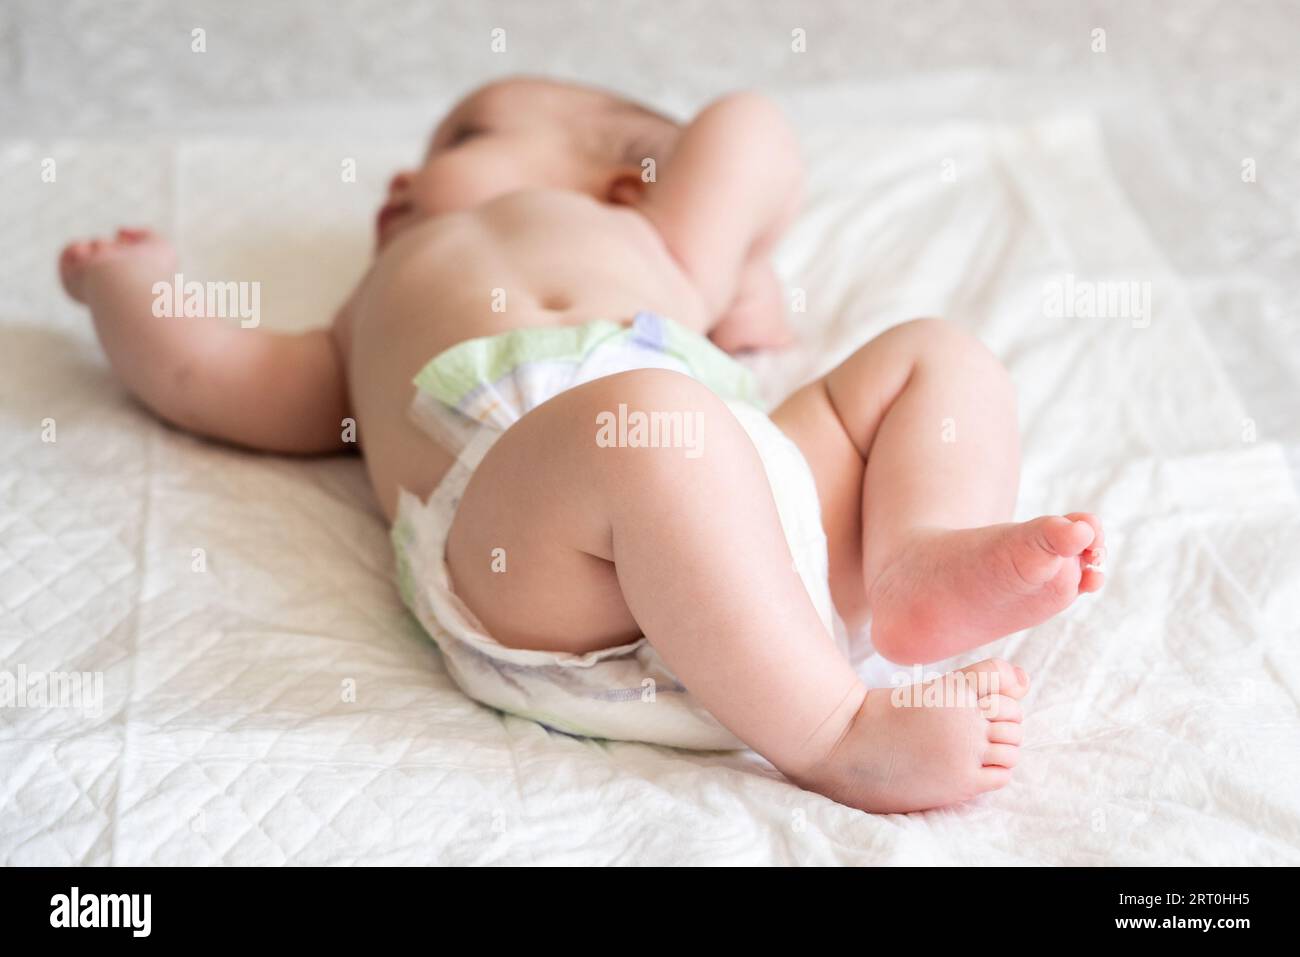 Diapered infant laying with feet in focus. Concept of cherishing small moments in life Stock Photo